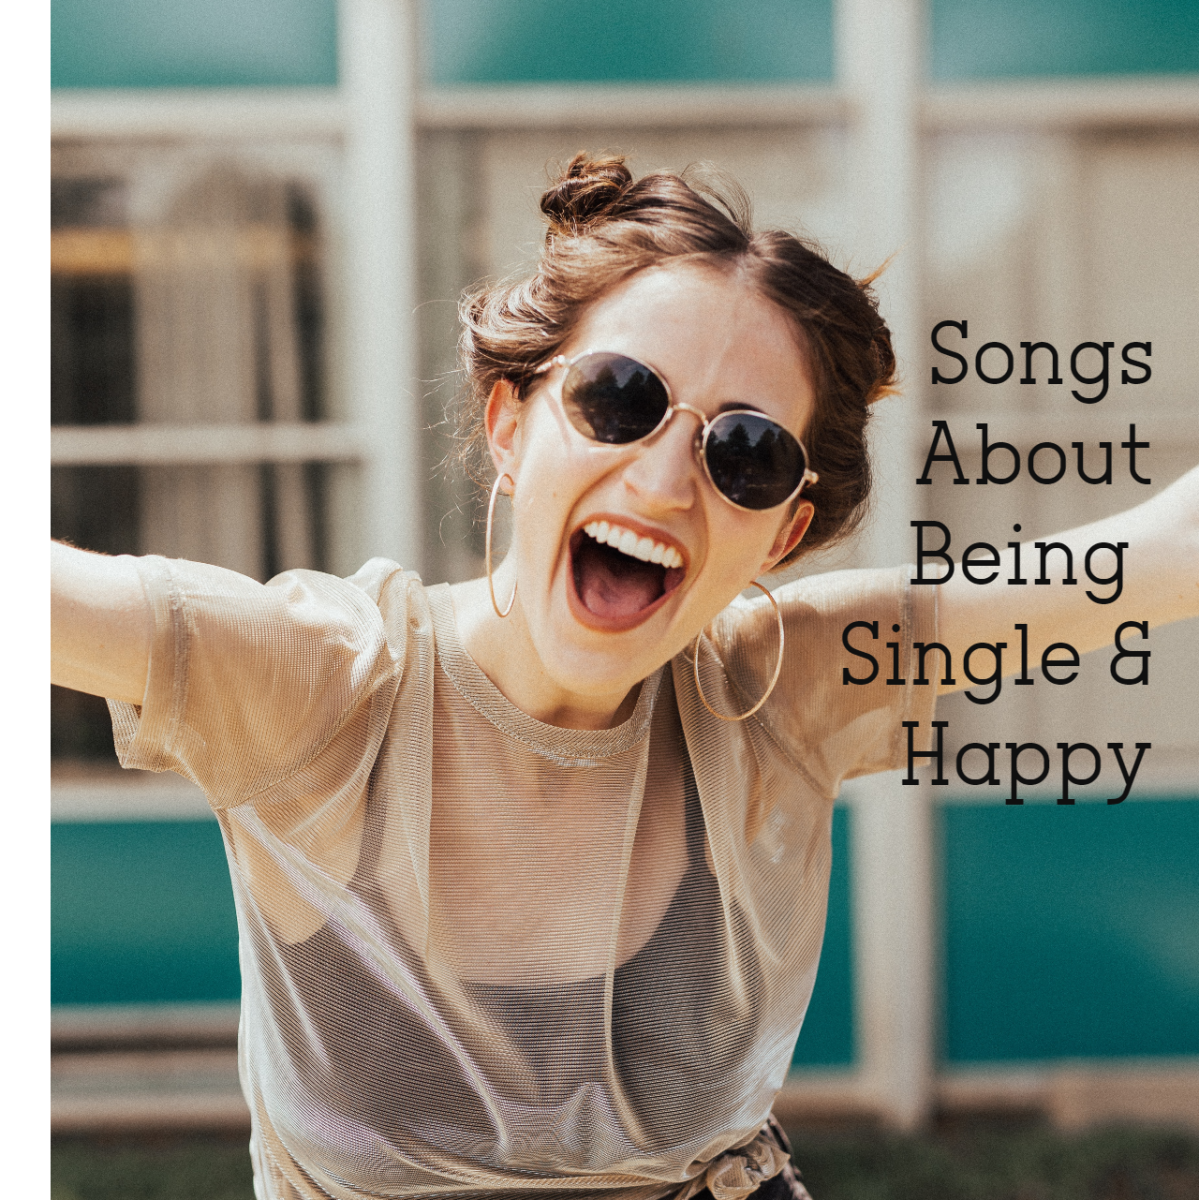 65 Songs About Being Single and Happy